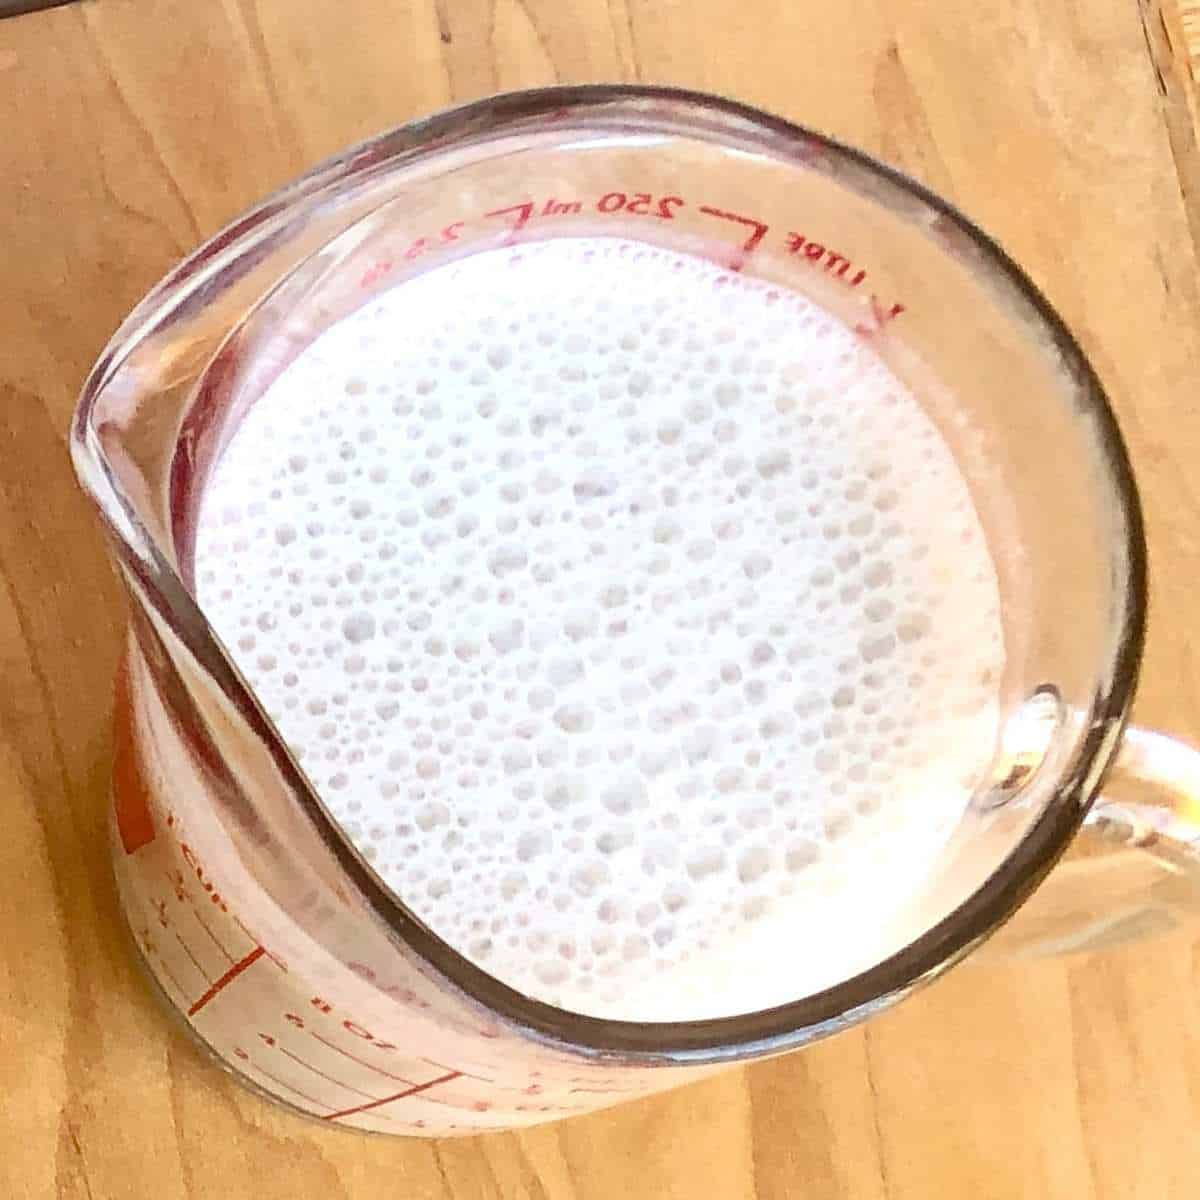 oat milk in a glass measuring cup.